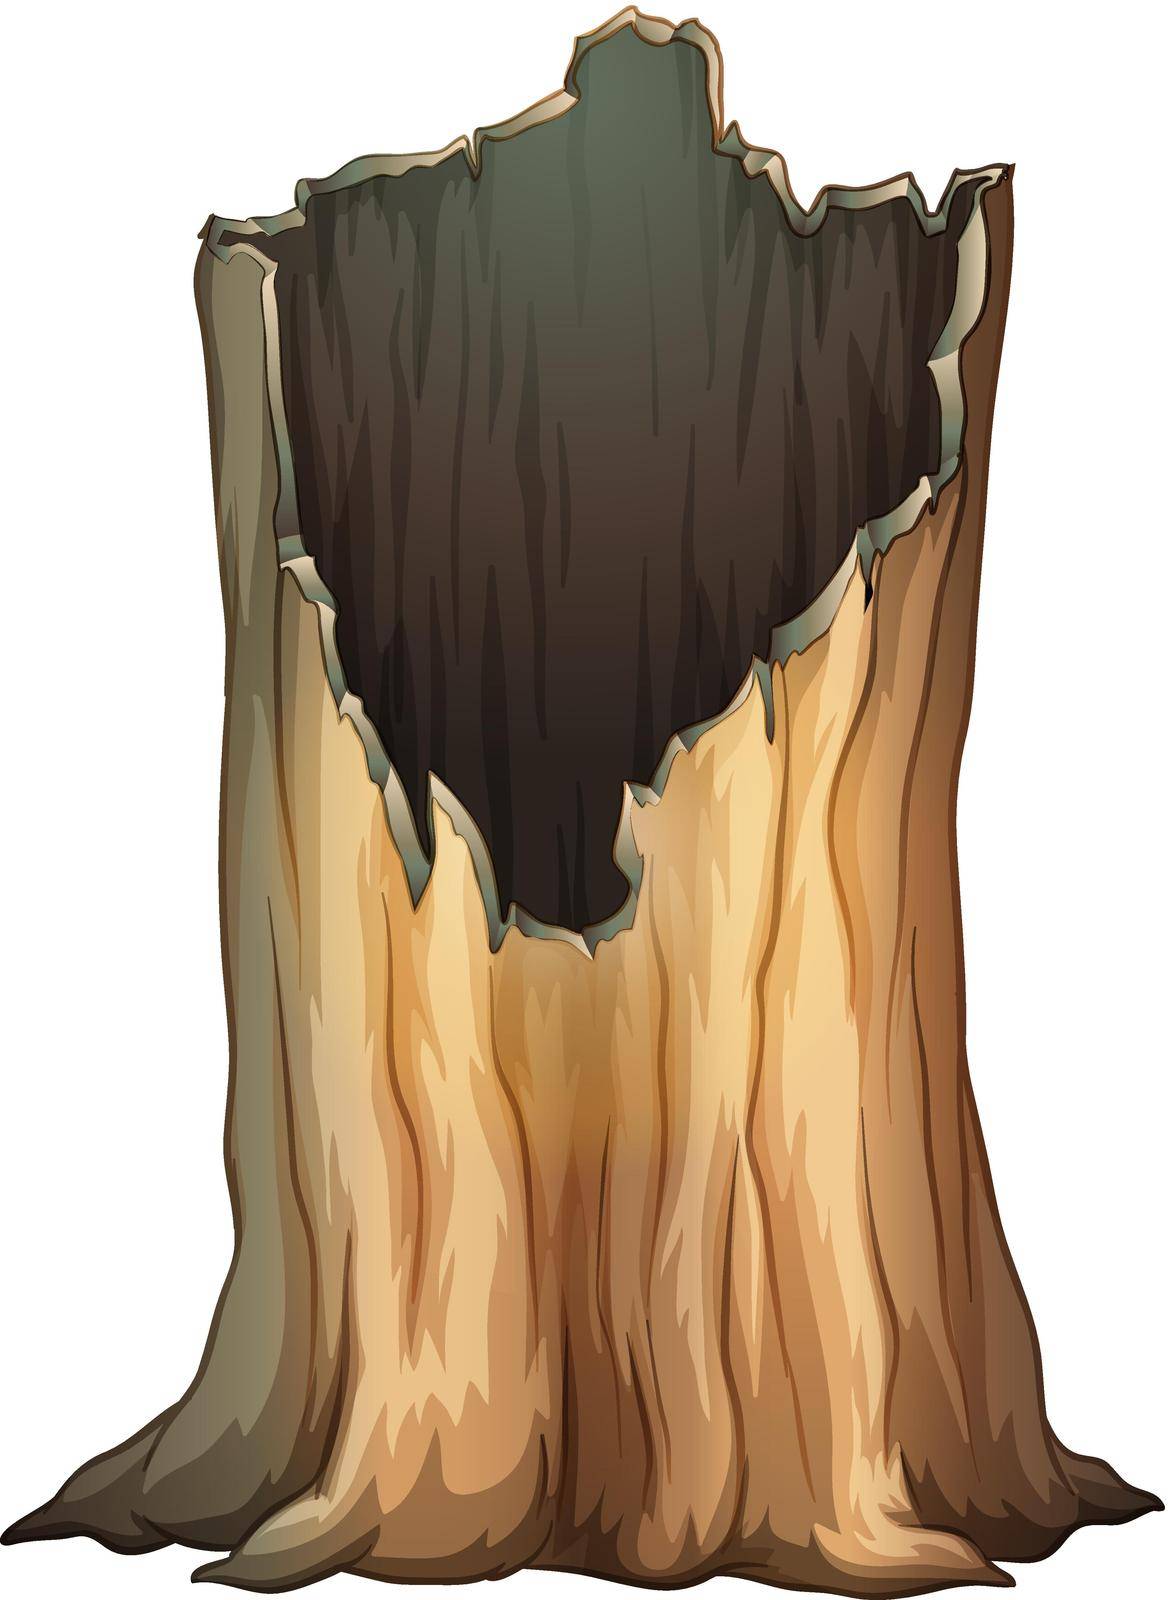 Illustration of a stump with a hollow on a white background